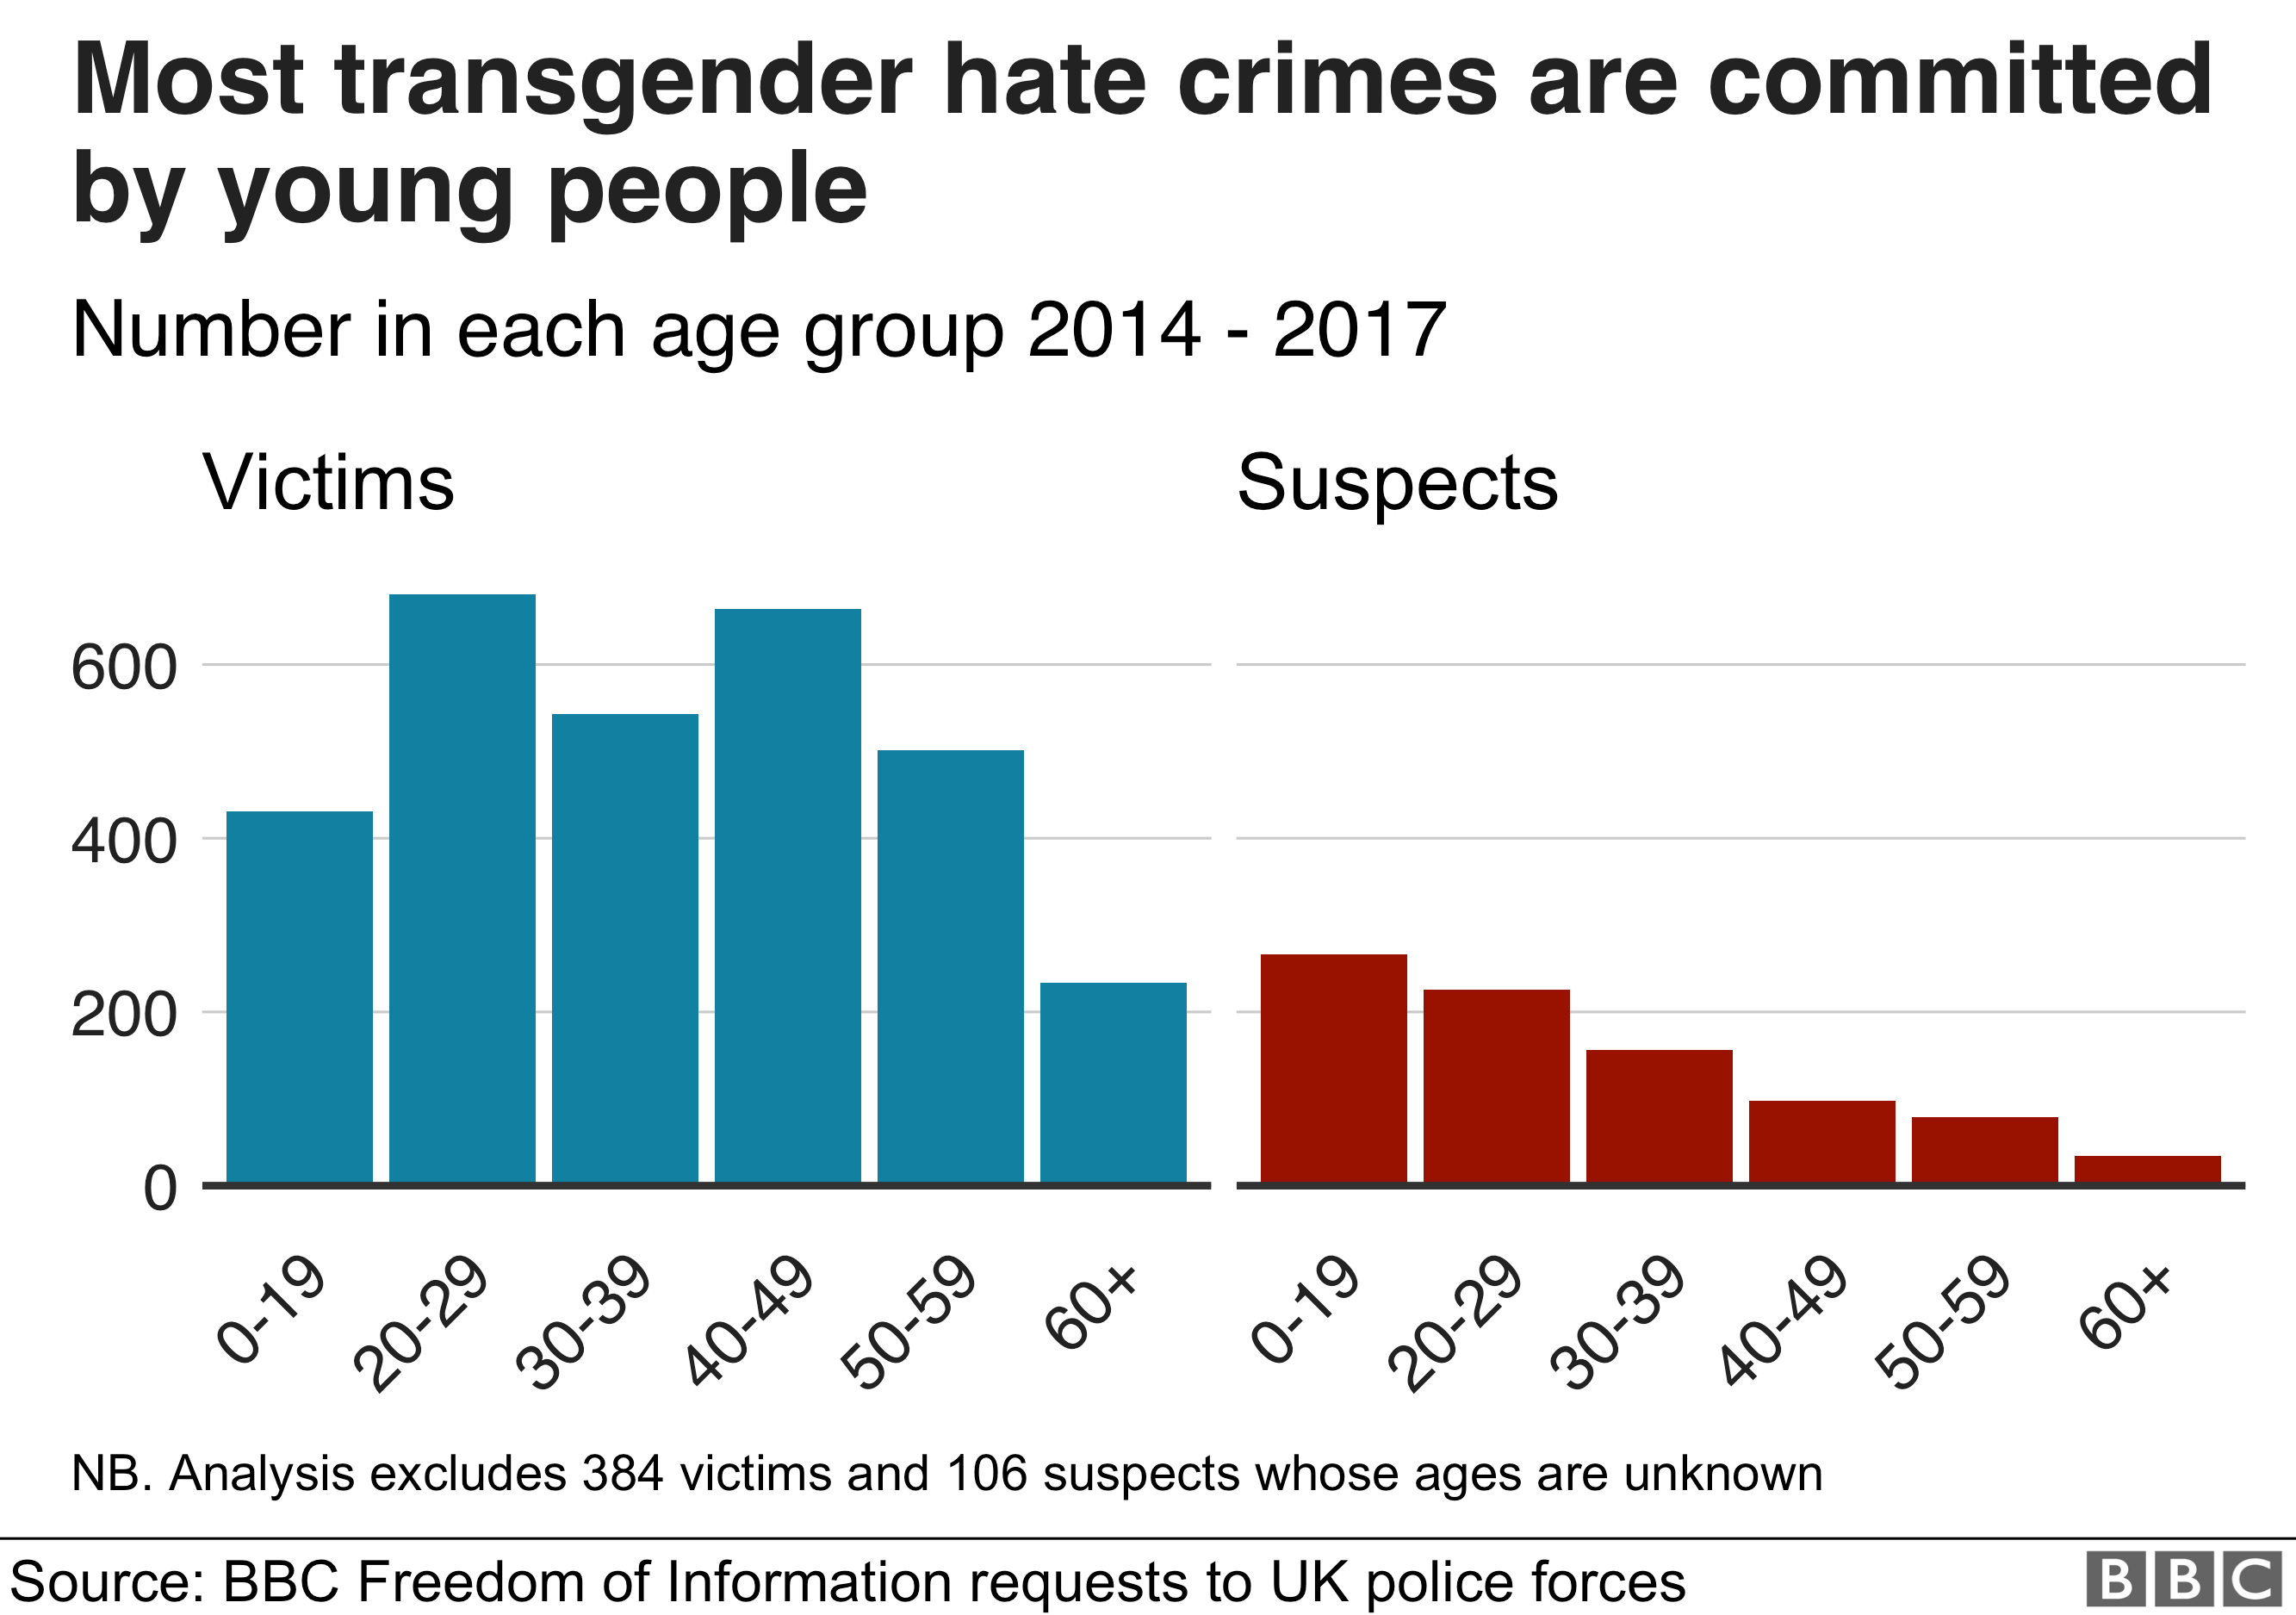 Most transgender hate crimes are committed by young people. The victims are quite evenly spread across the 20 to 60 age groups